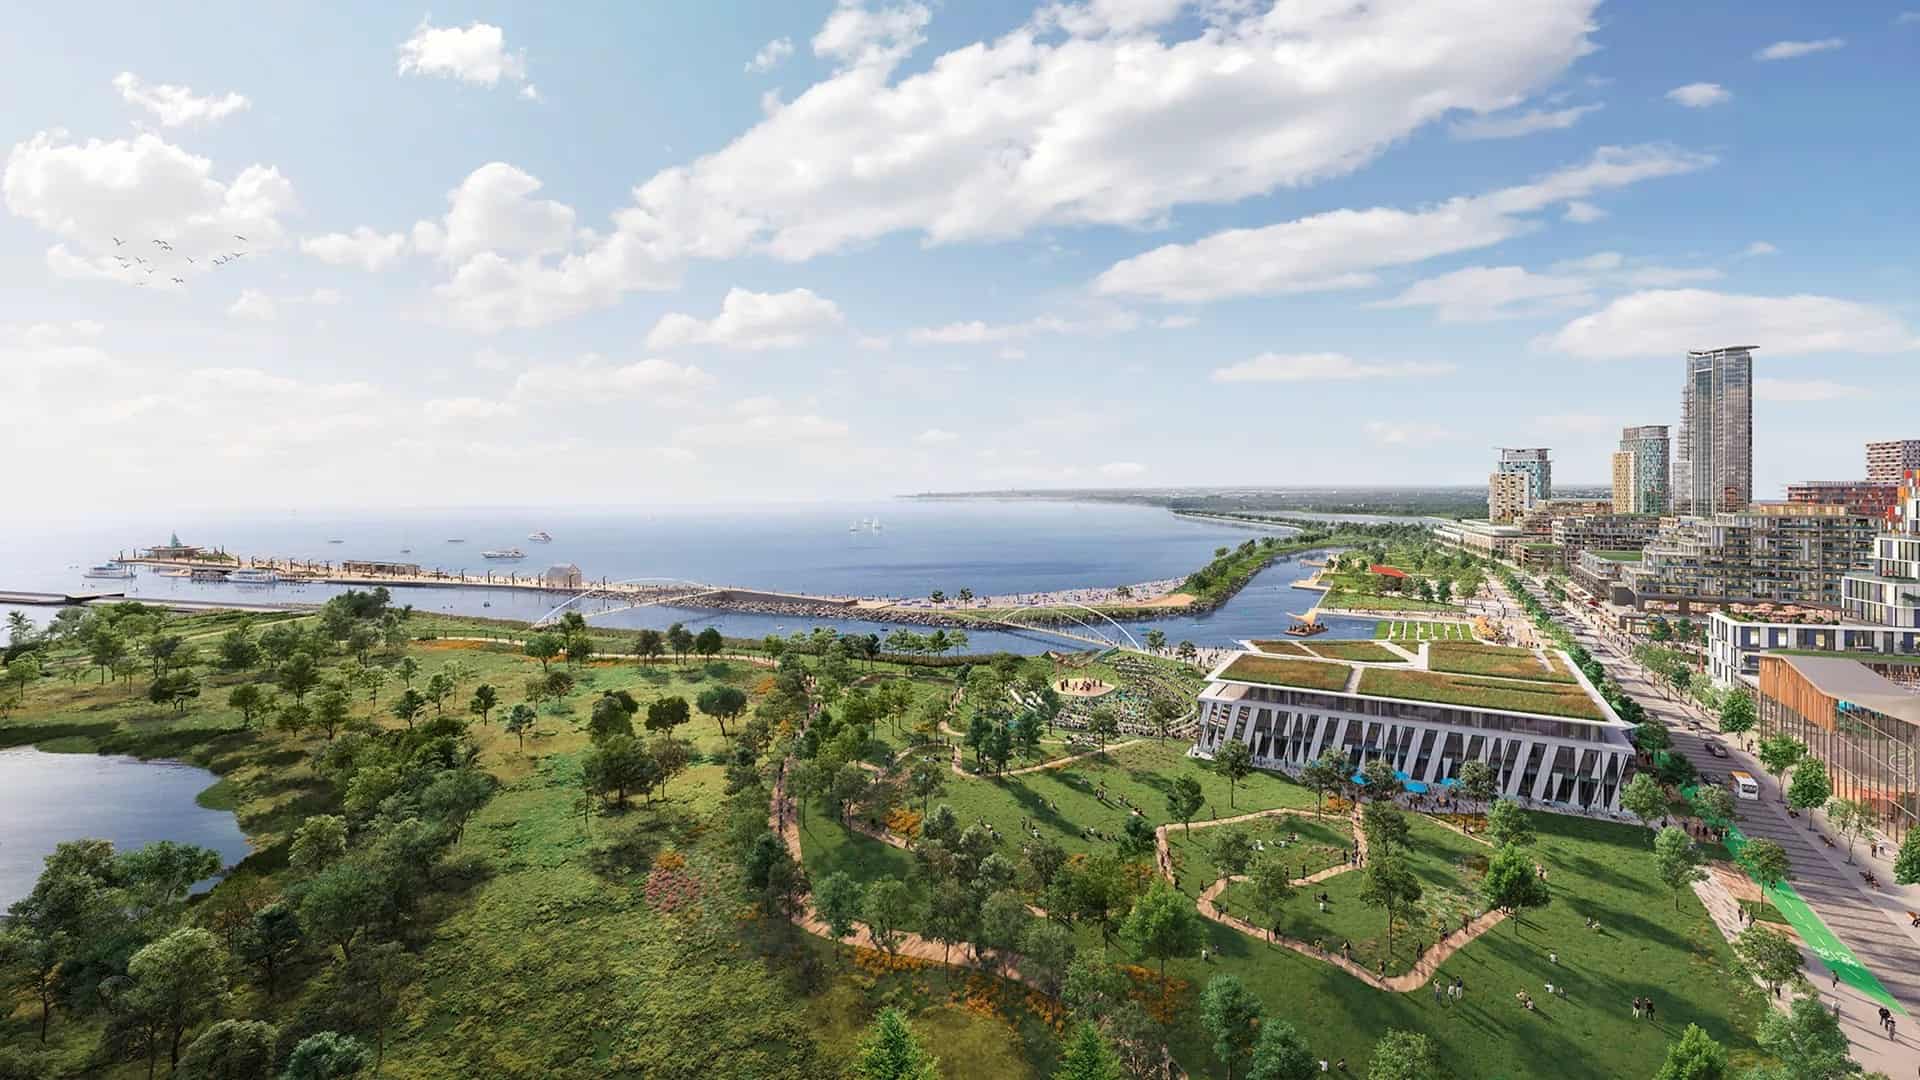 Lakeview Village Pier expected to attract tourists and boost Mississauga economy